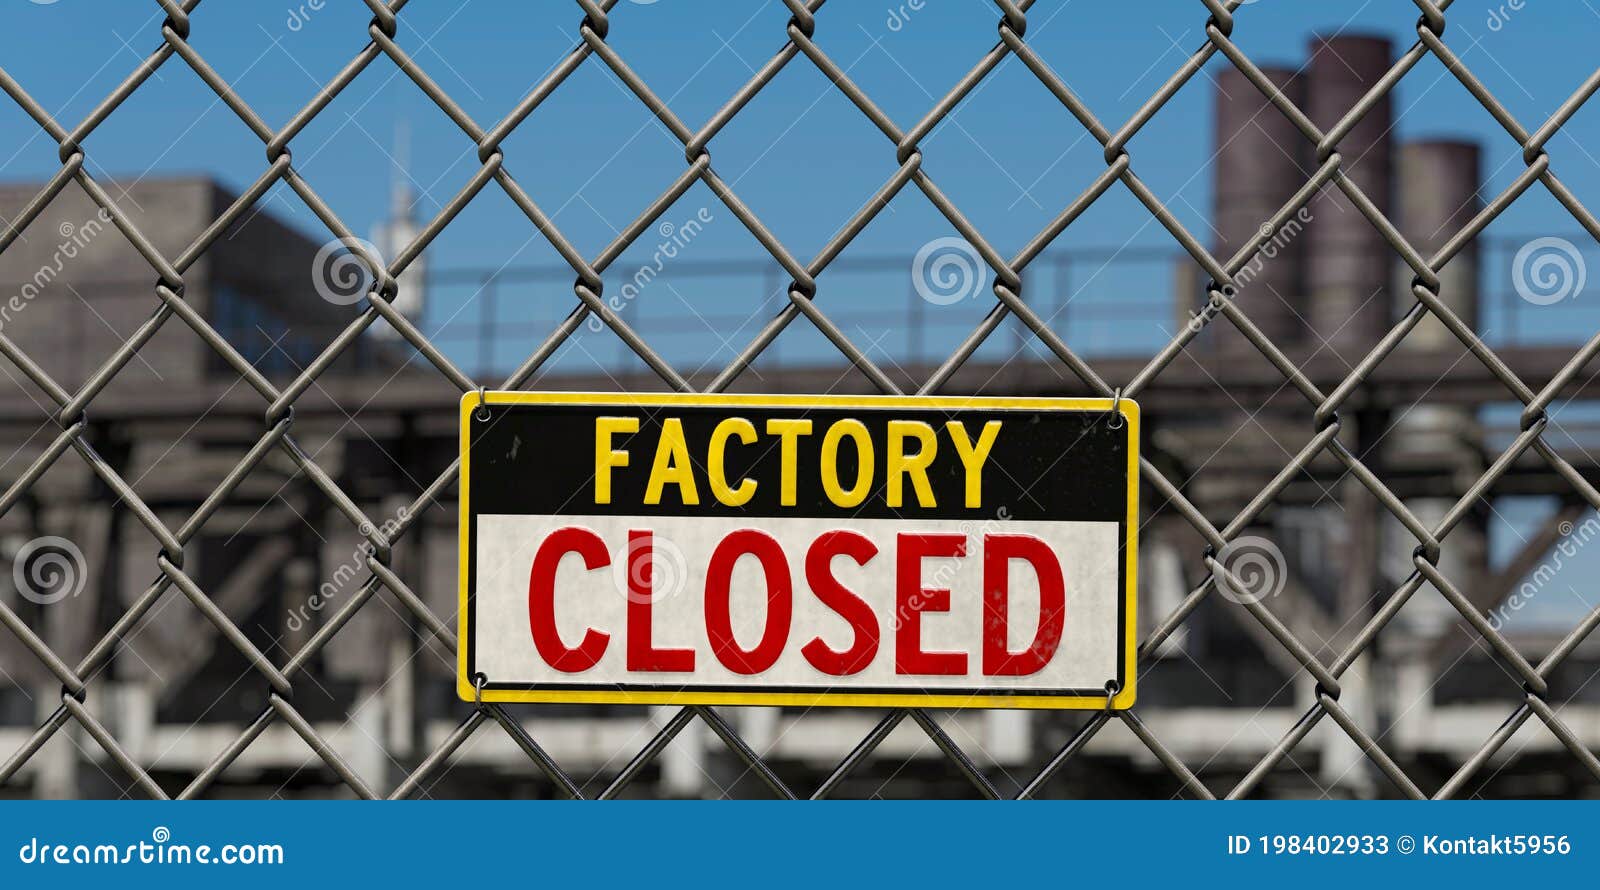 sign: factory closed